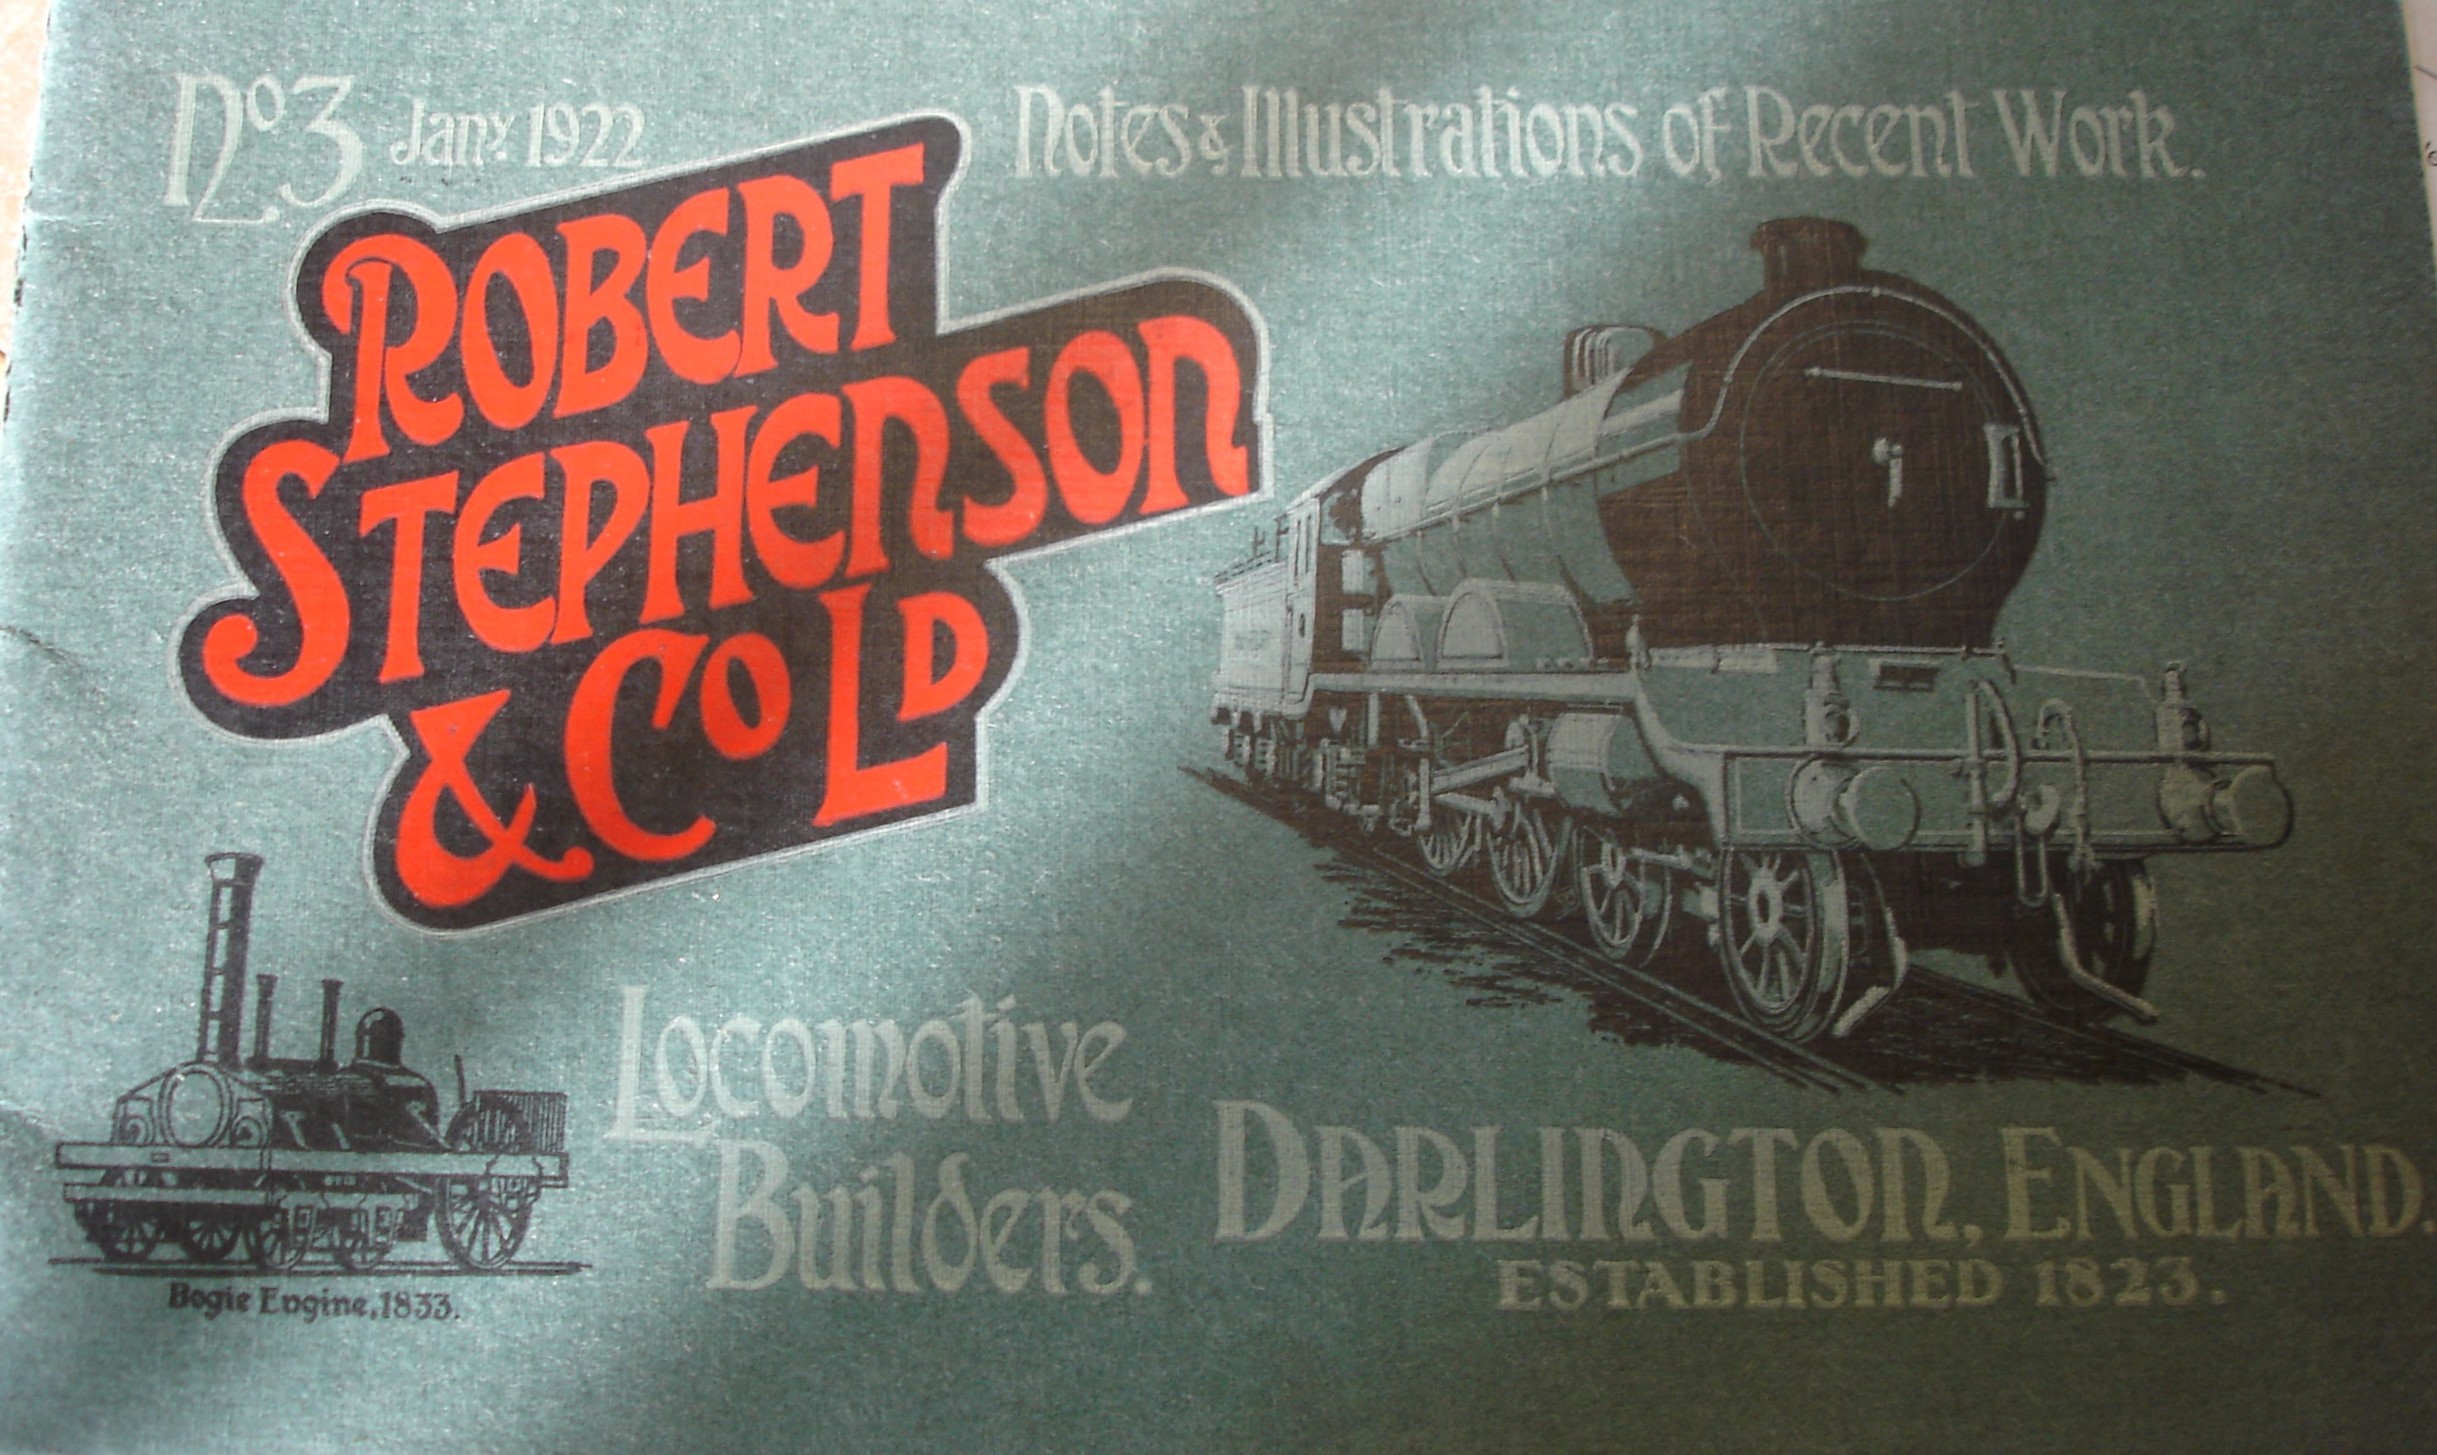 Grey brochure with red font and drawings of two locomotives.